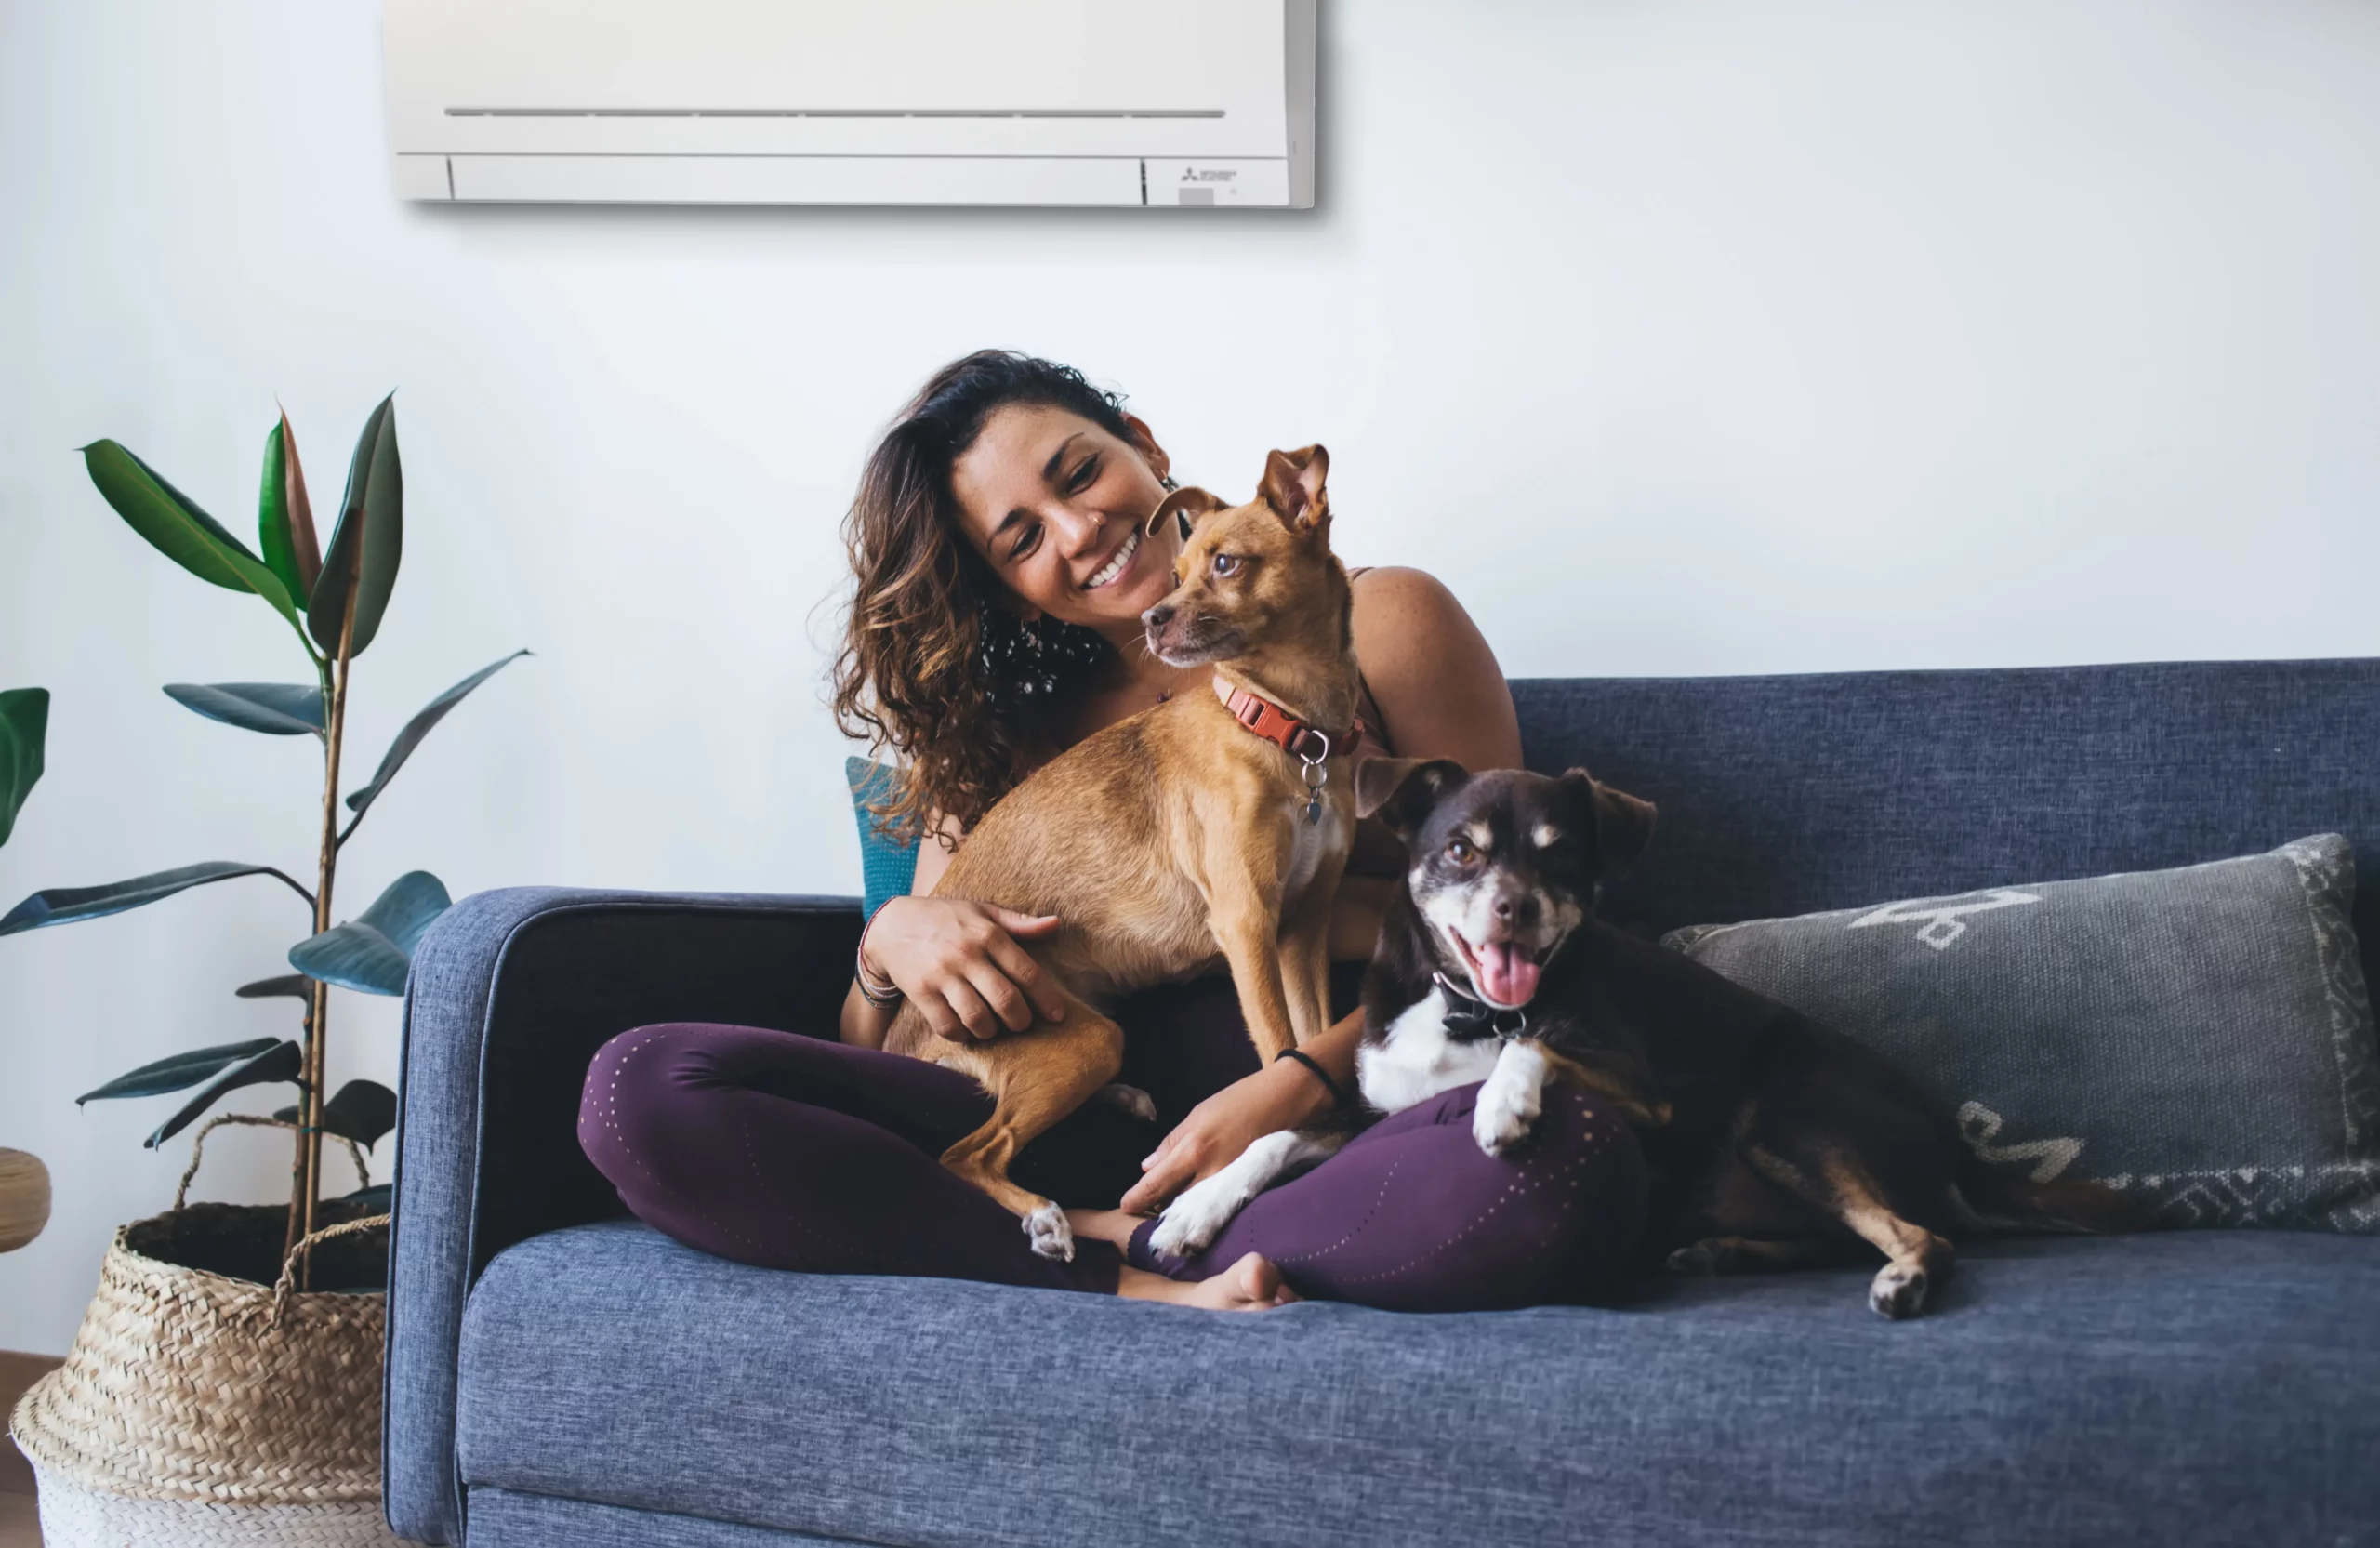 Young woman in purple yoga pants relaxing with her dogs in front of a Mitsubishi heating and cooling system.